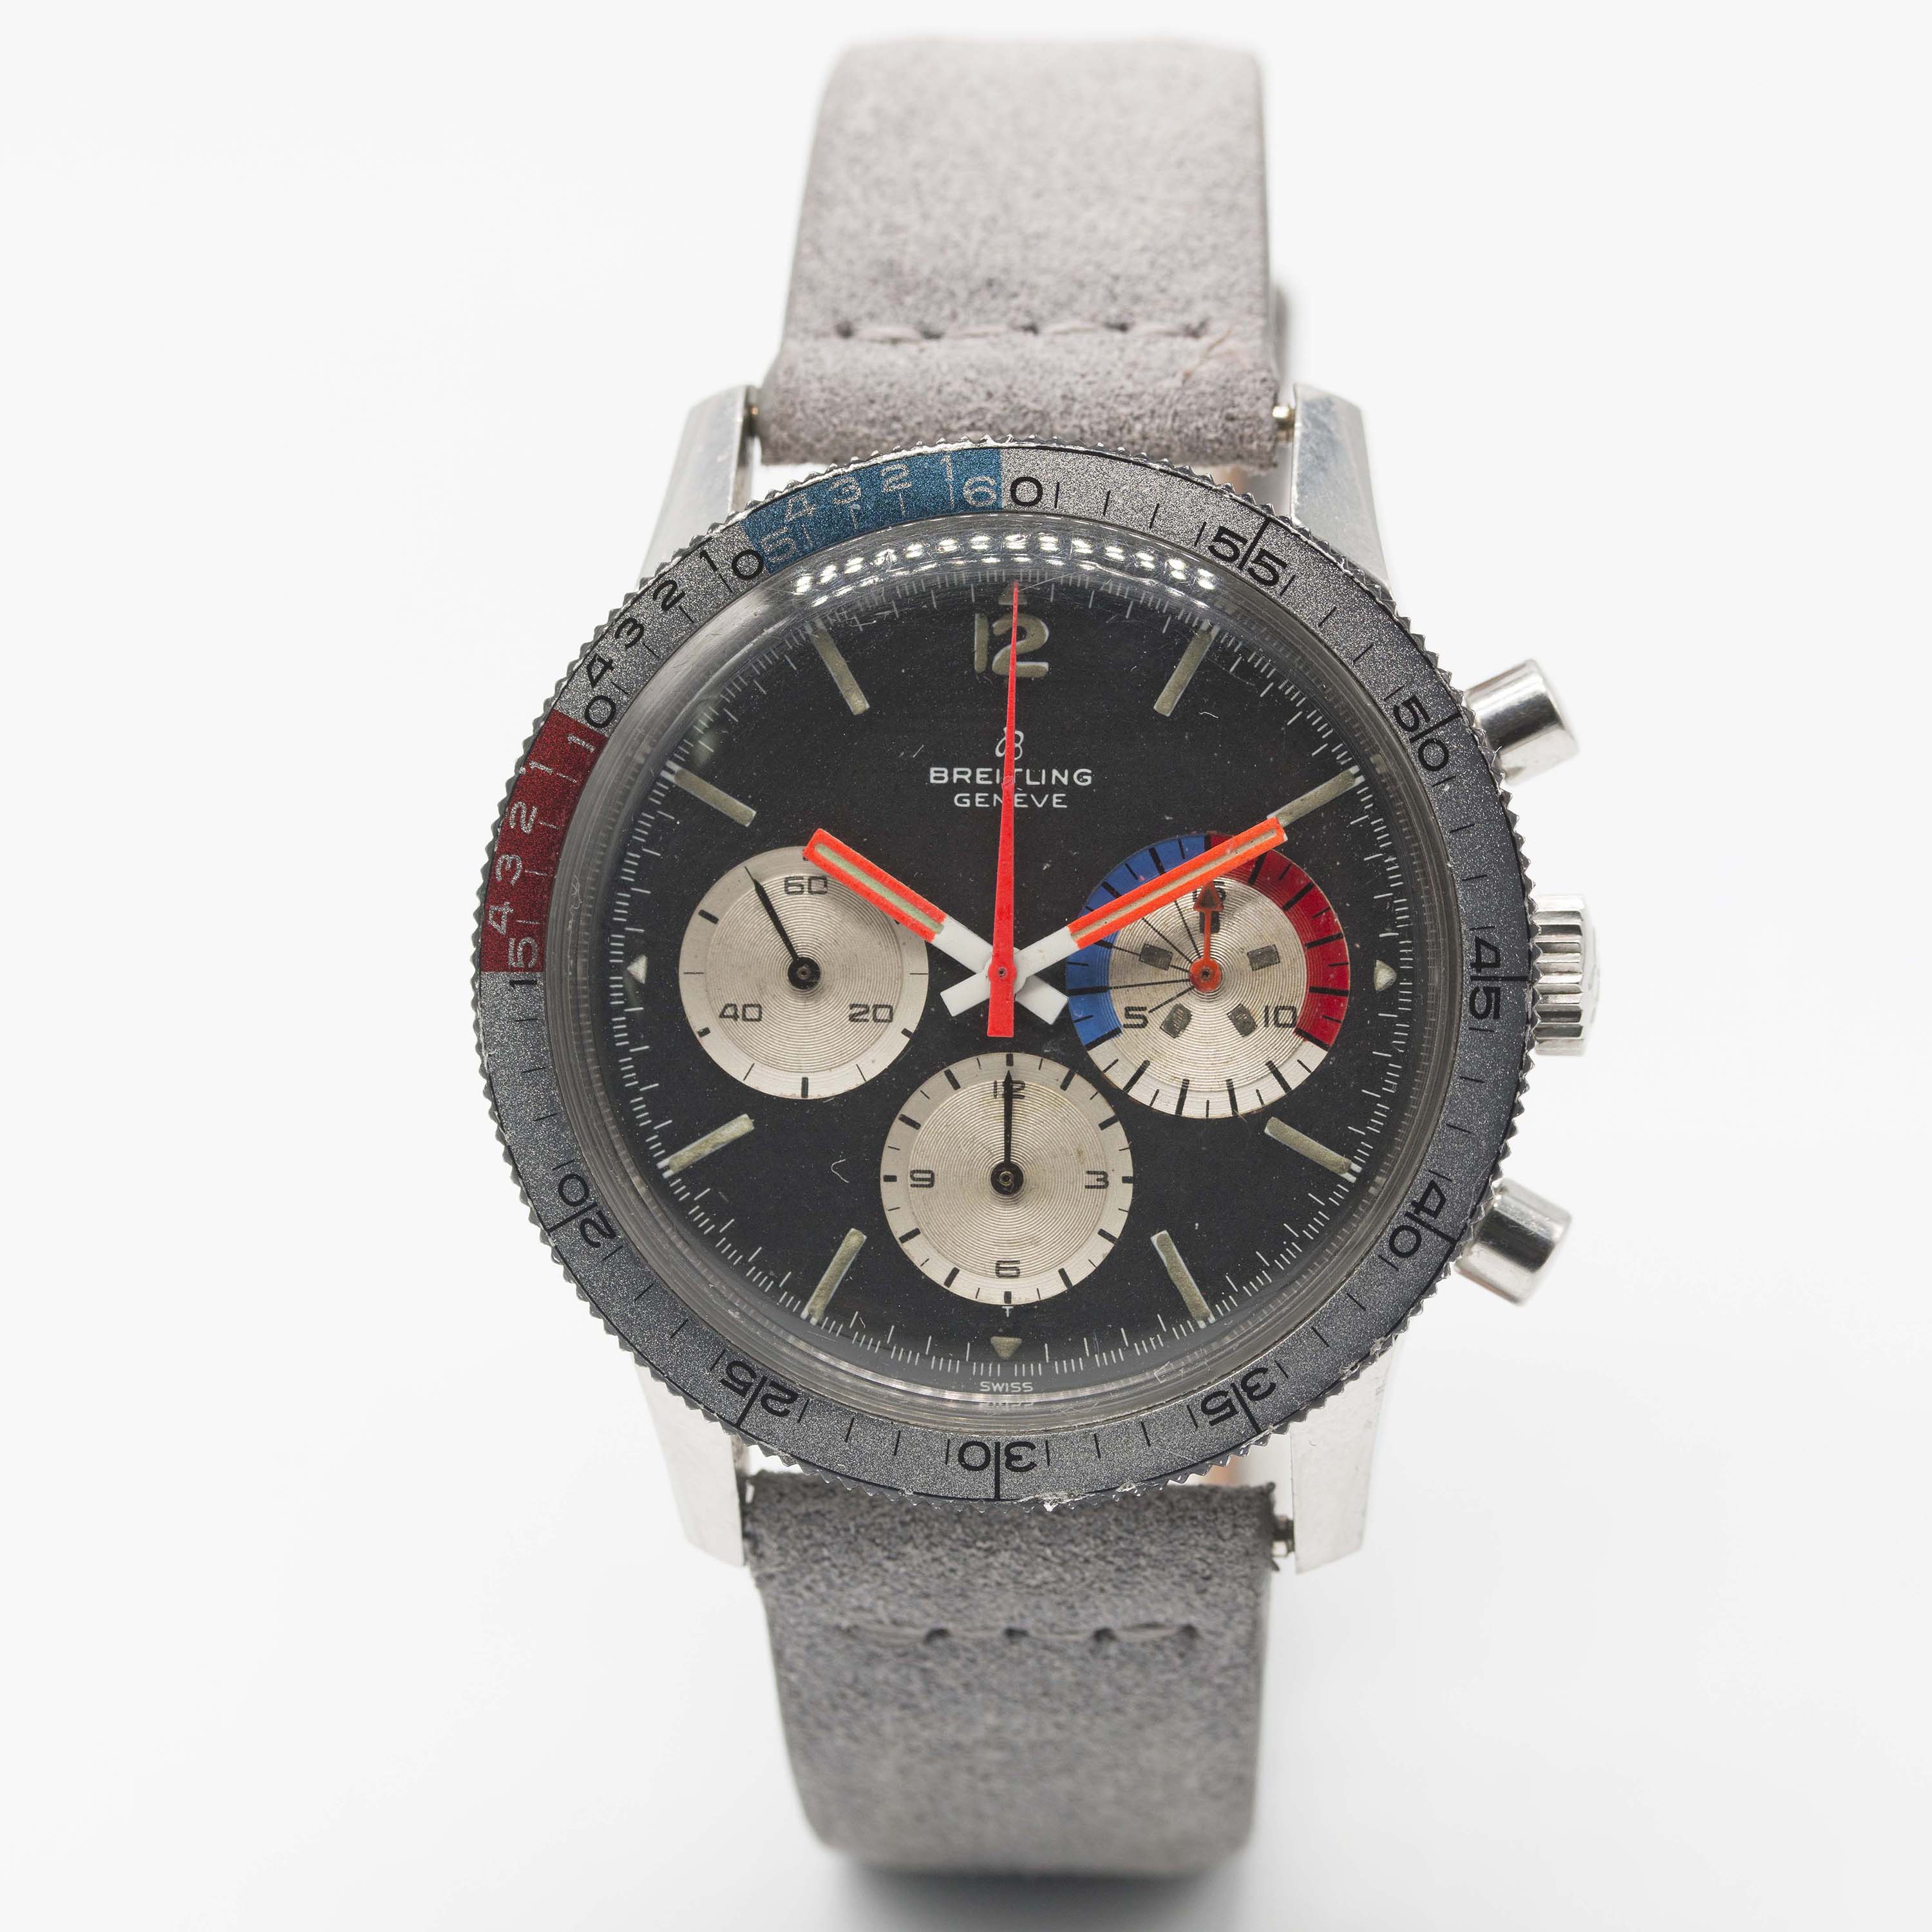 A VERY RARE GENTLEMAN'S STAINLESS STEEL BREITLING "CO PILOT" YACHTING CHRONOGRAPH WRIST WATCH - Image 3 of 11